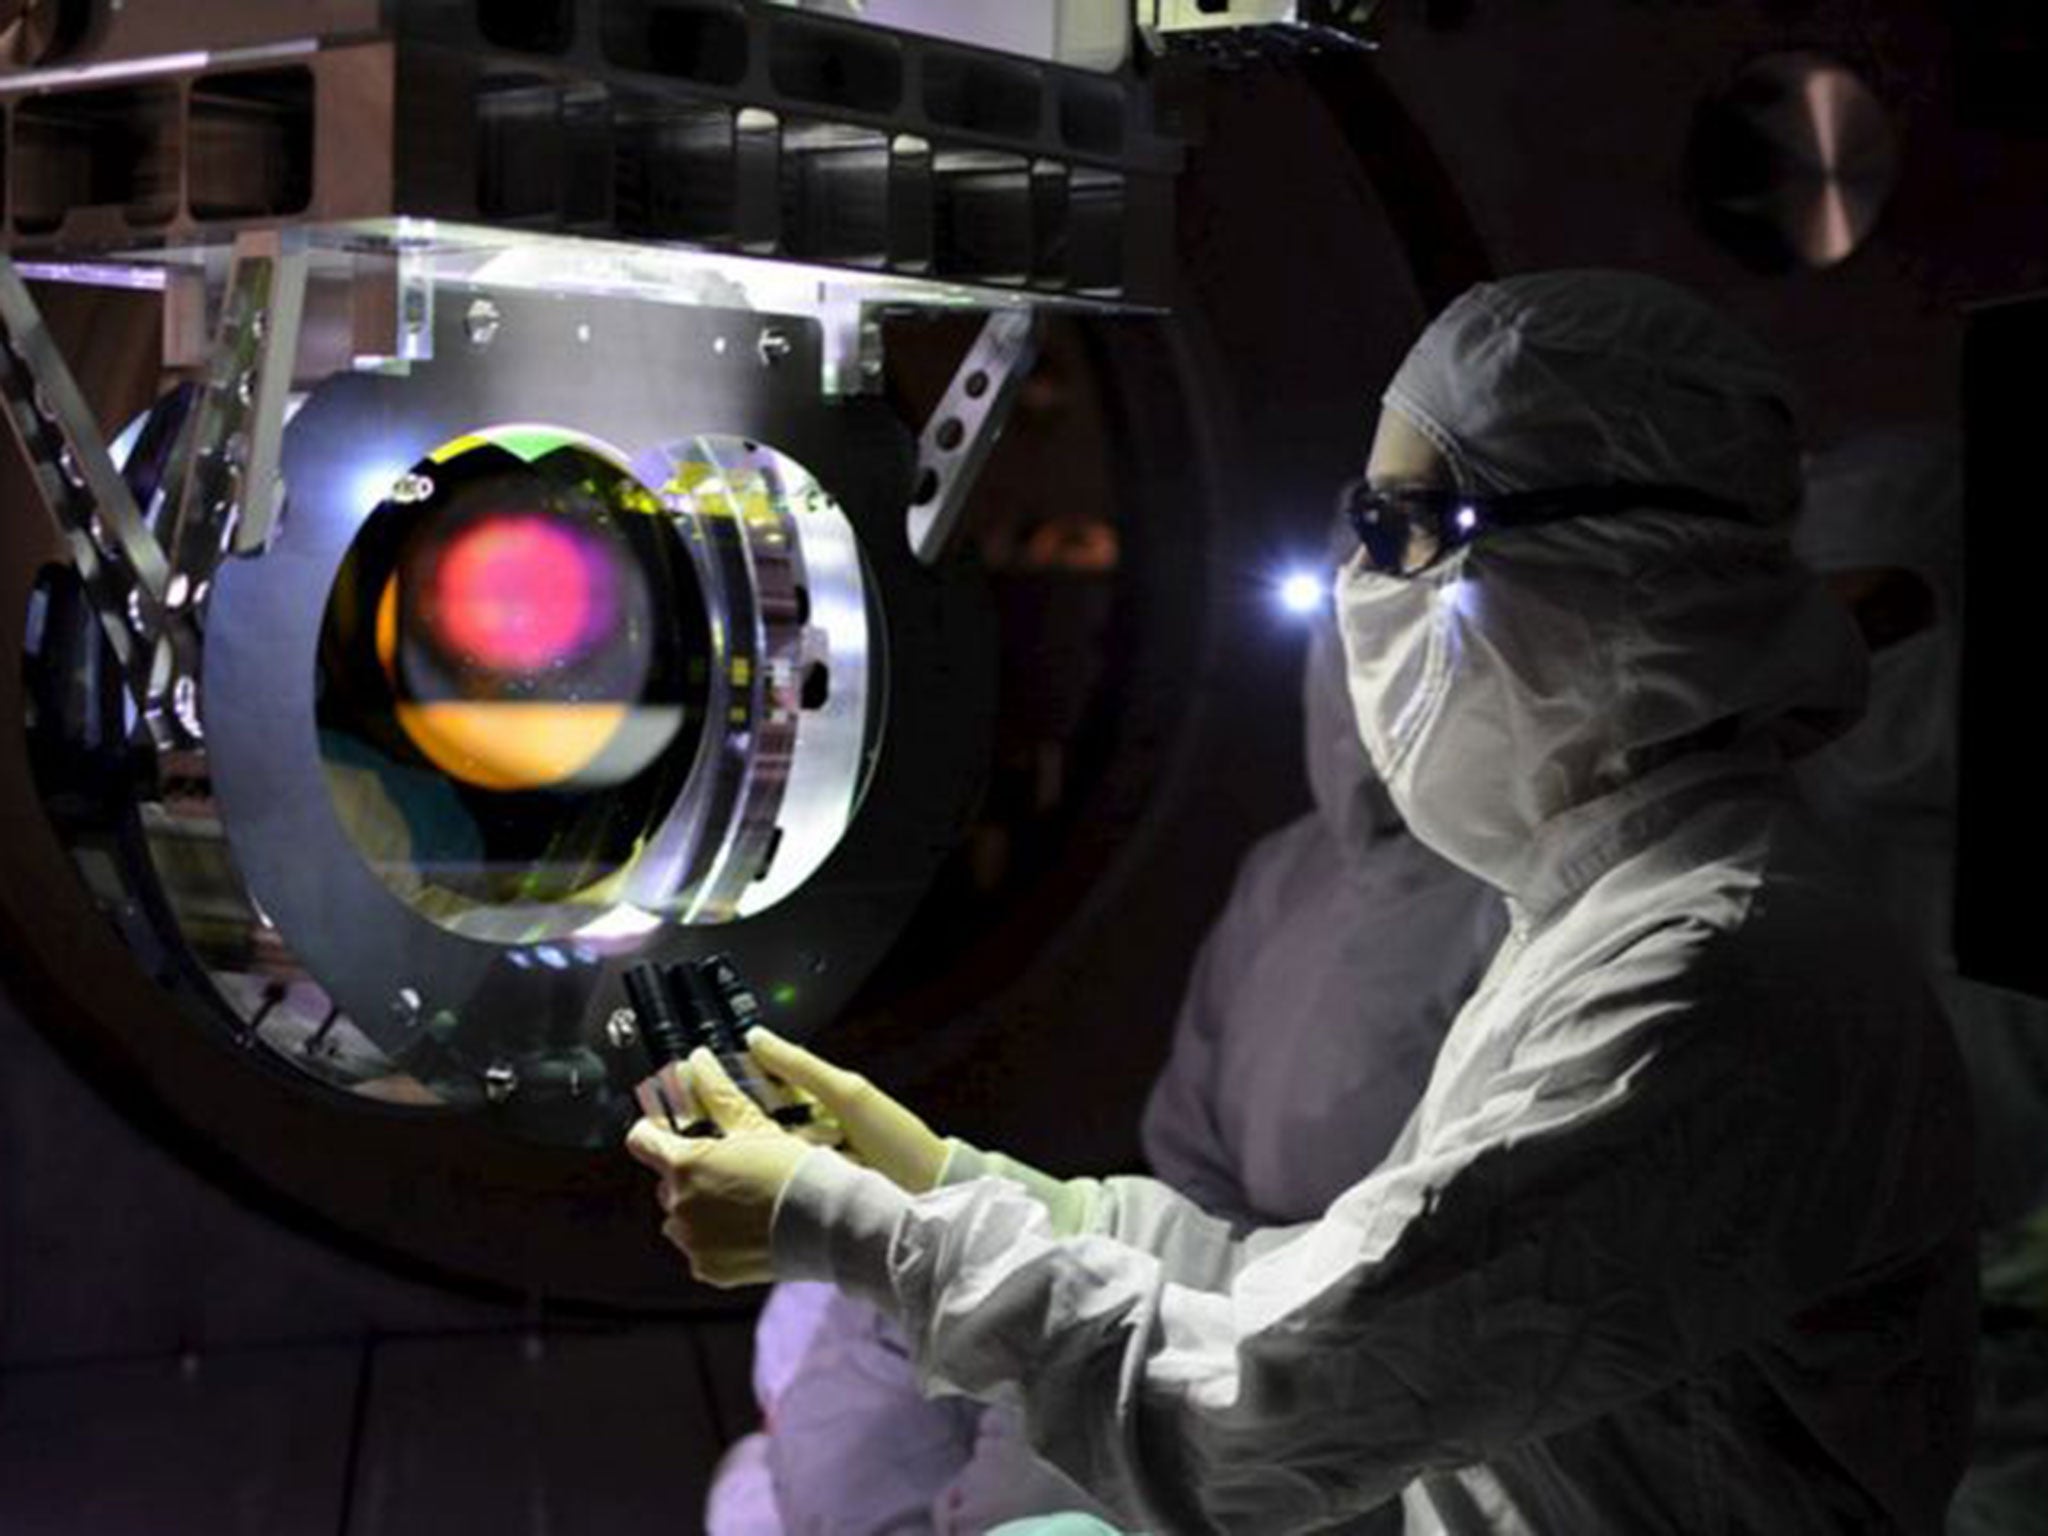 A technician at Ligo, the project set up to detect gravitational waves